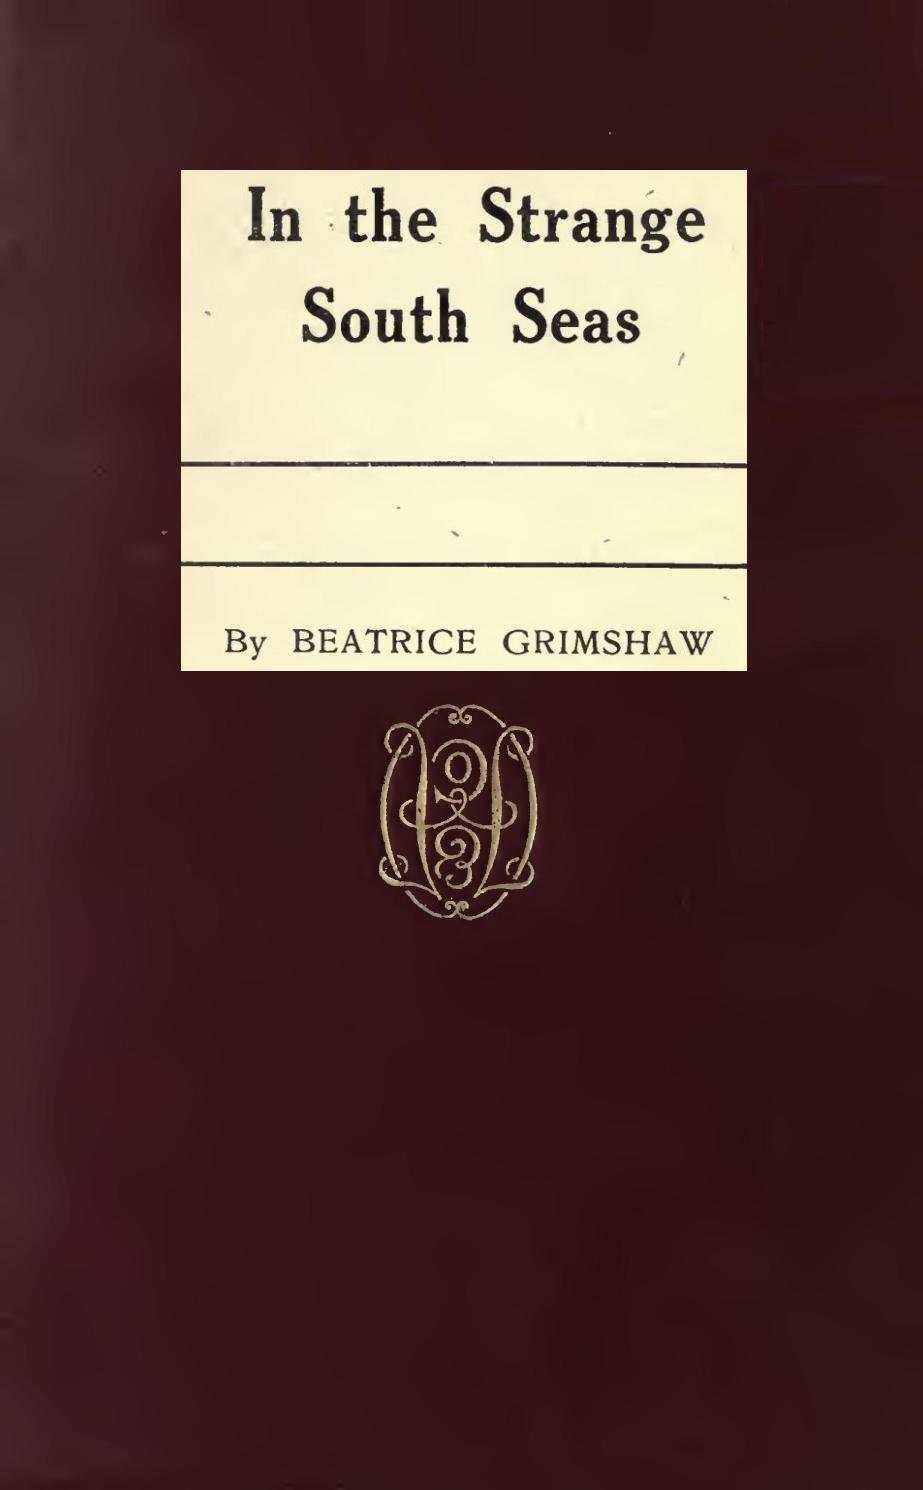 In The Strange South Seas, by Beatrice Grimshaw